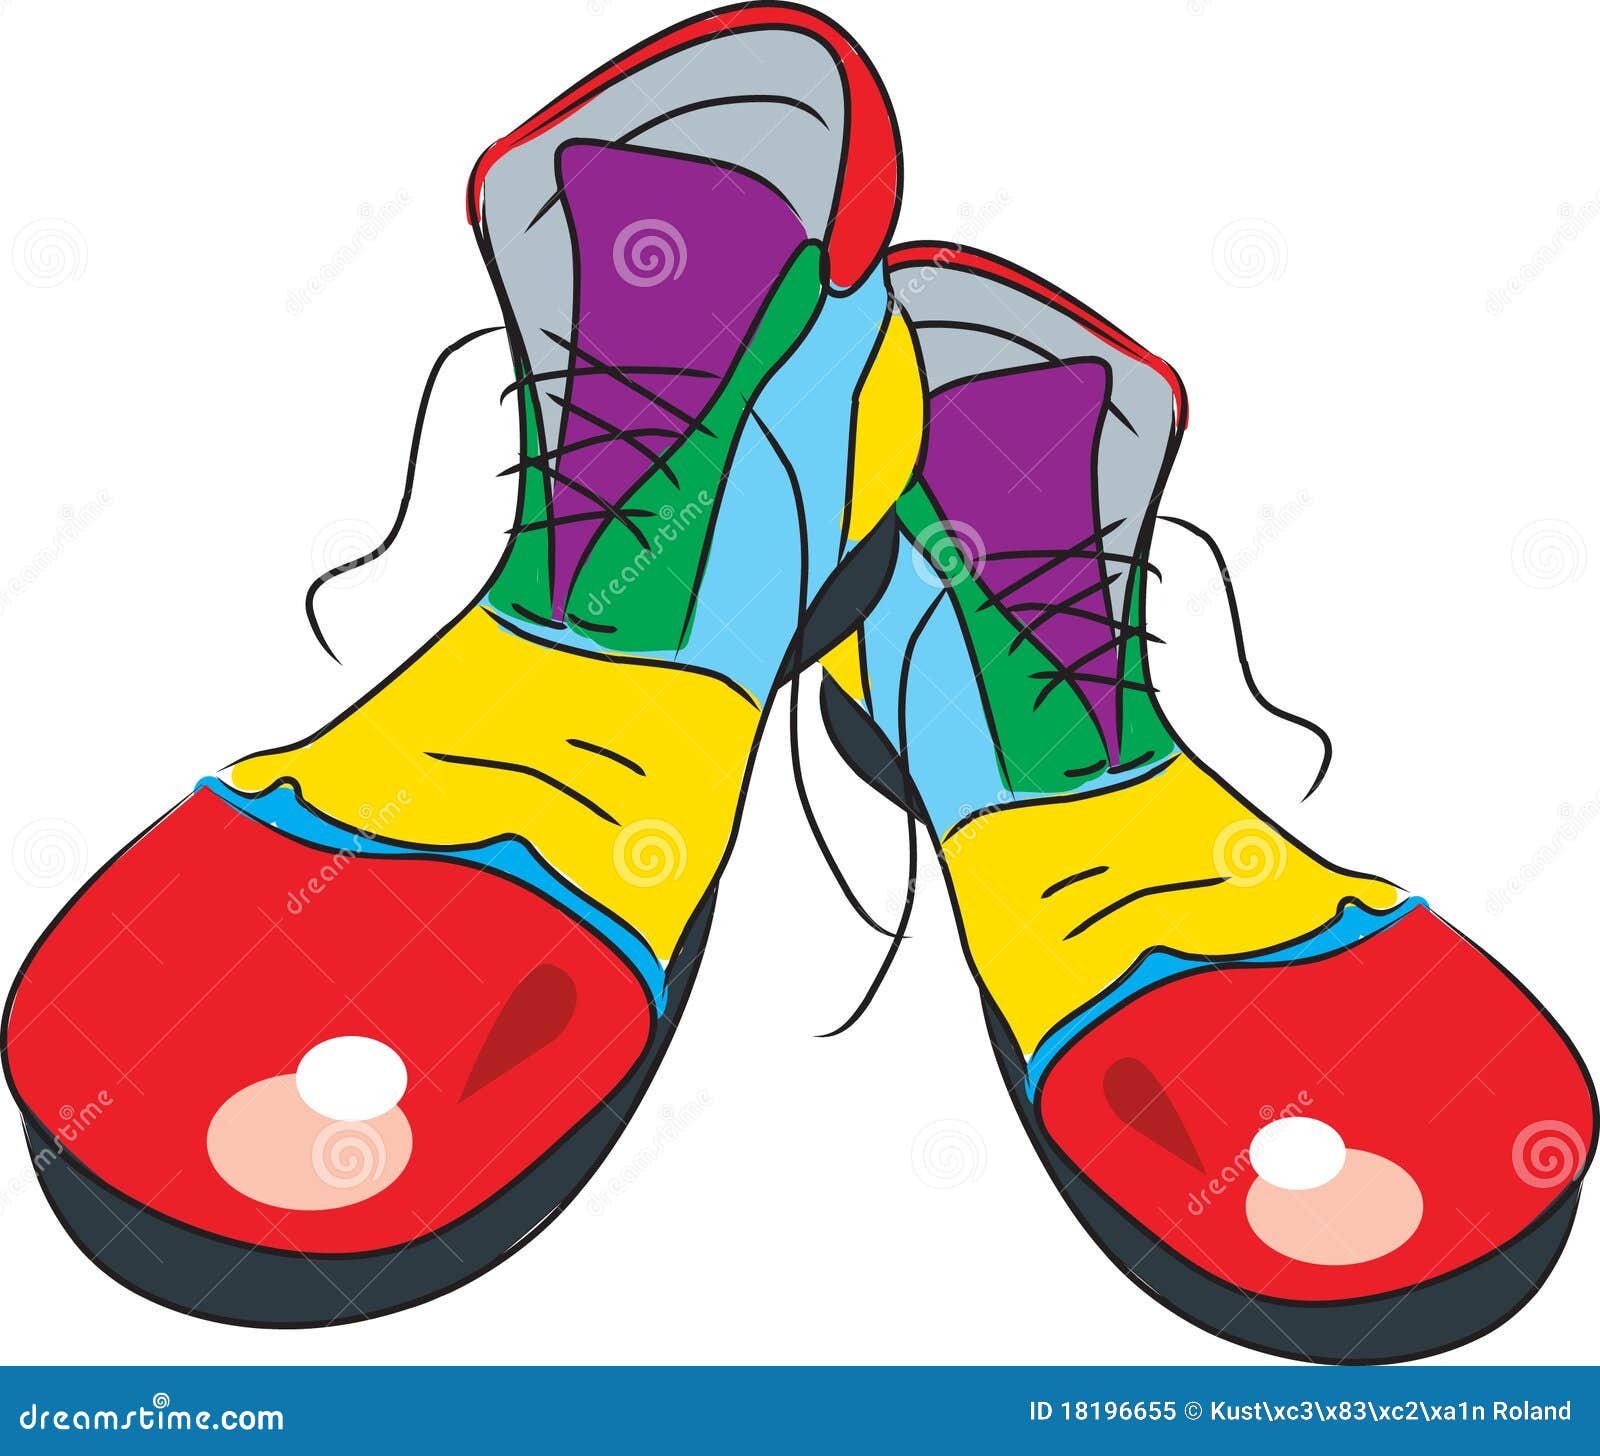 Clown shoes stock illustration. Illustration of decorate - 18196655